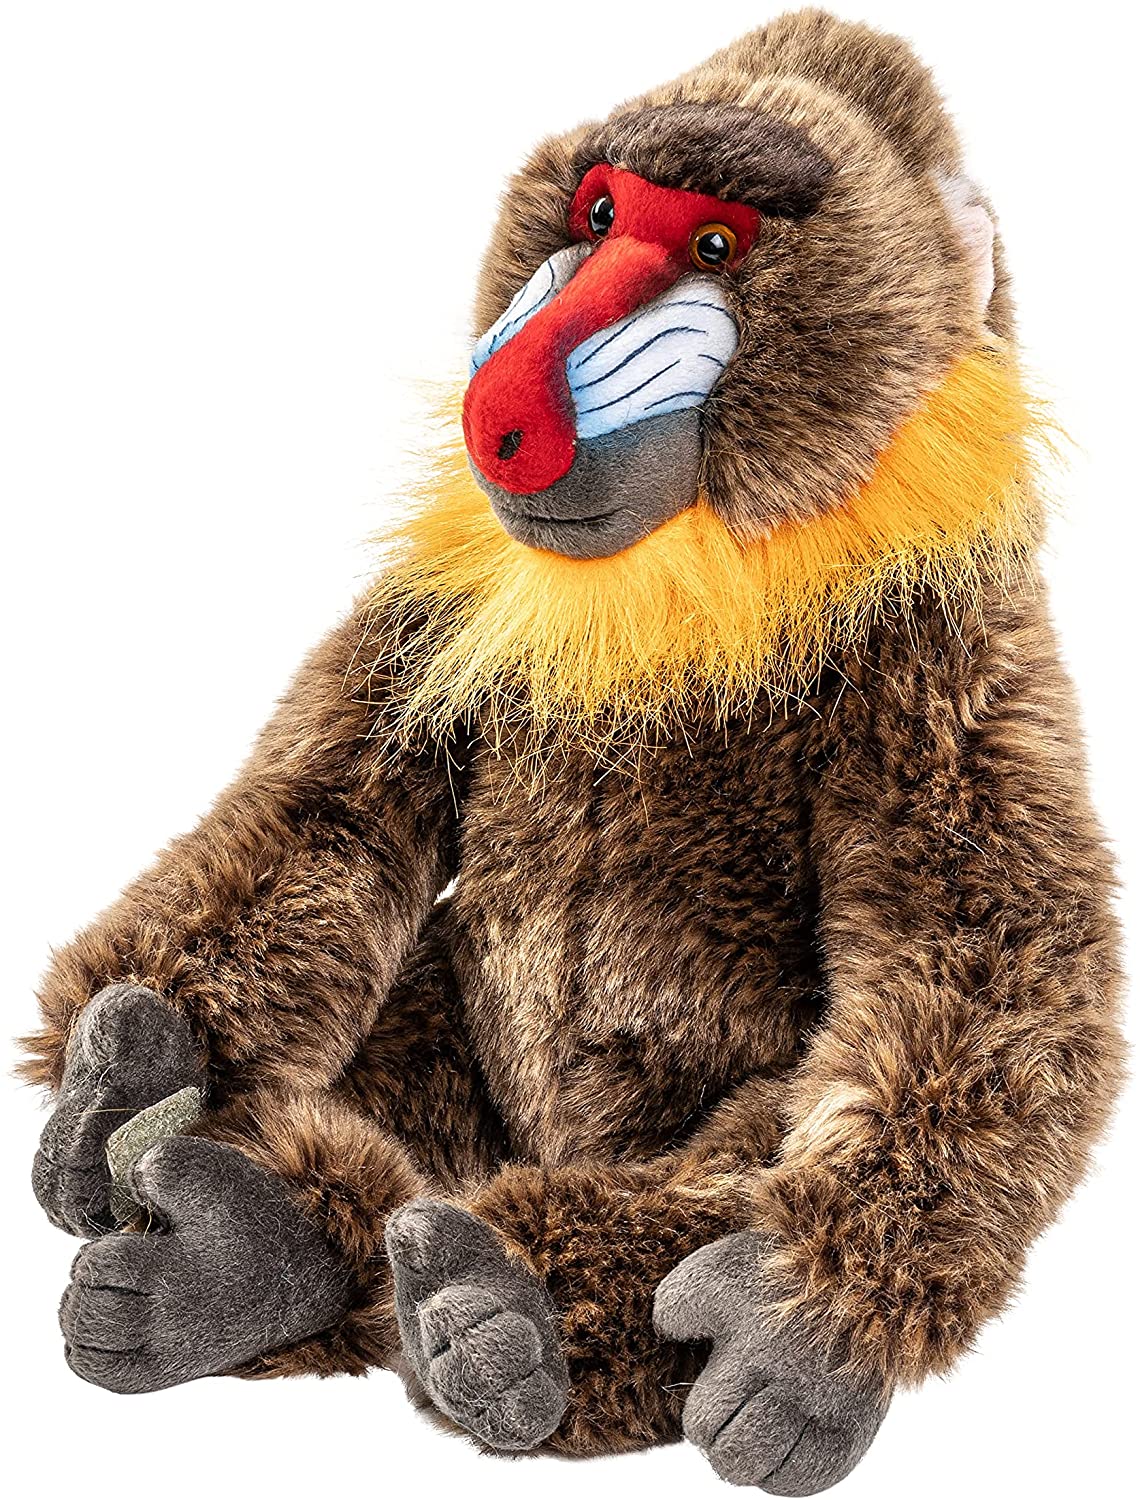 Mandrill with Velcro-Hands - 29 cm (height) 